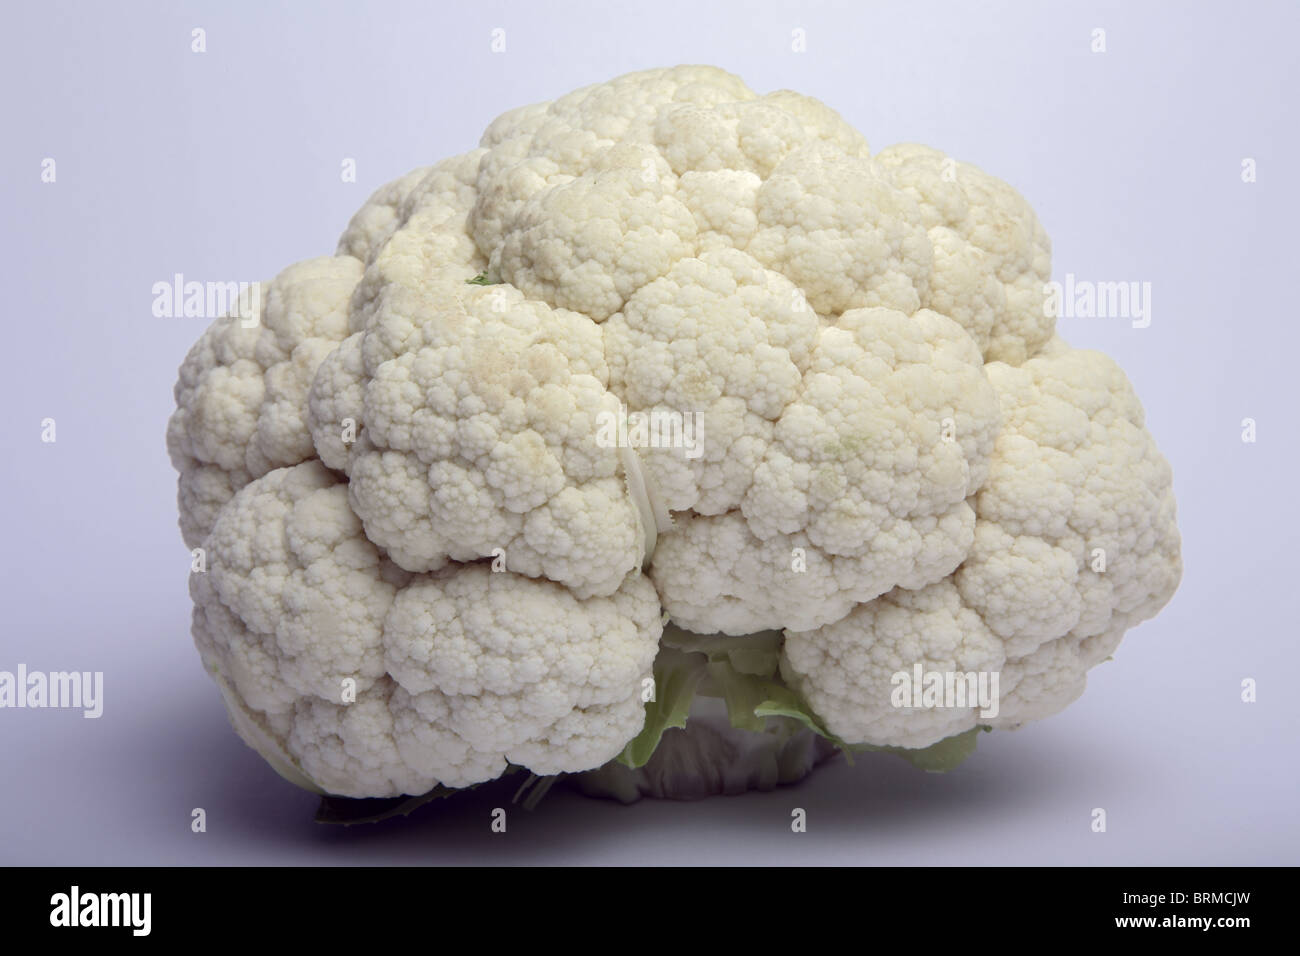 Whole cauliflower with leaves removed. Stock Photo